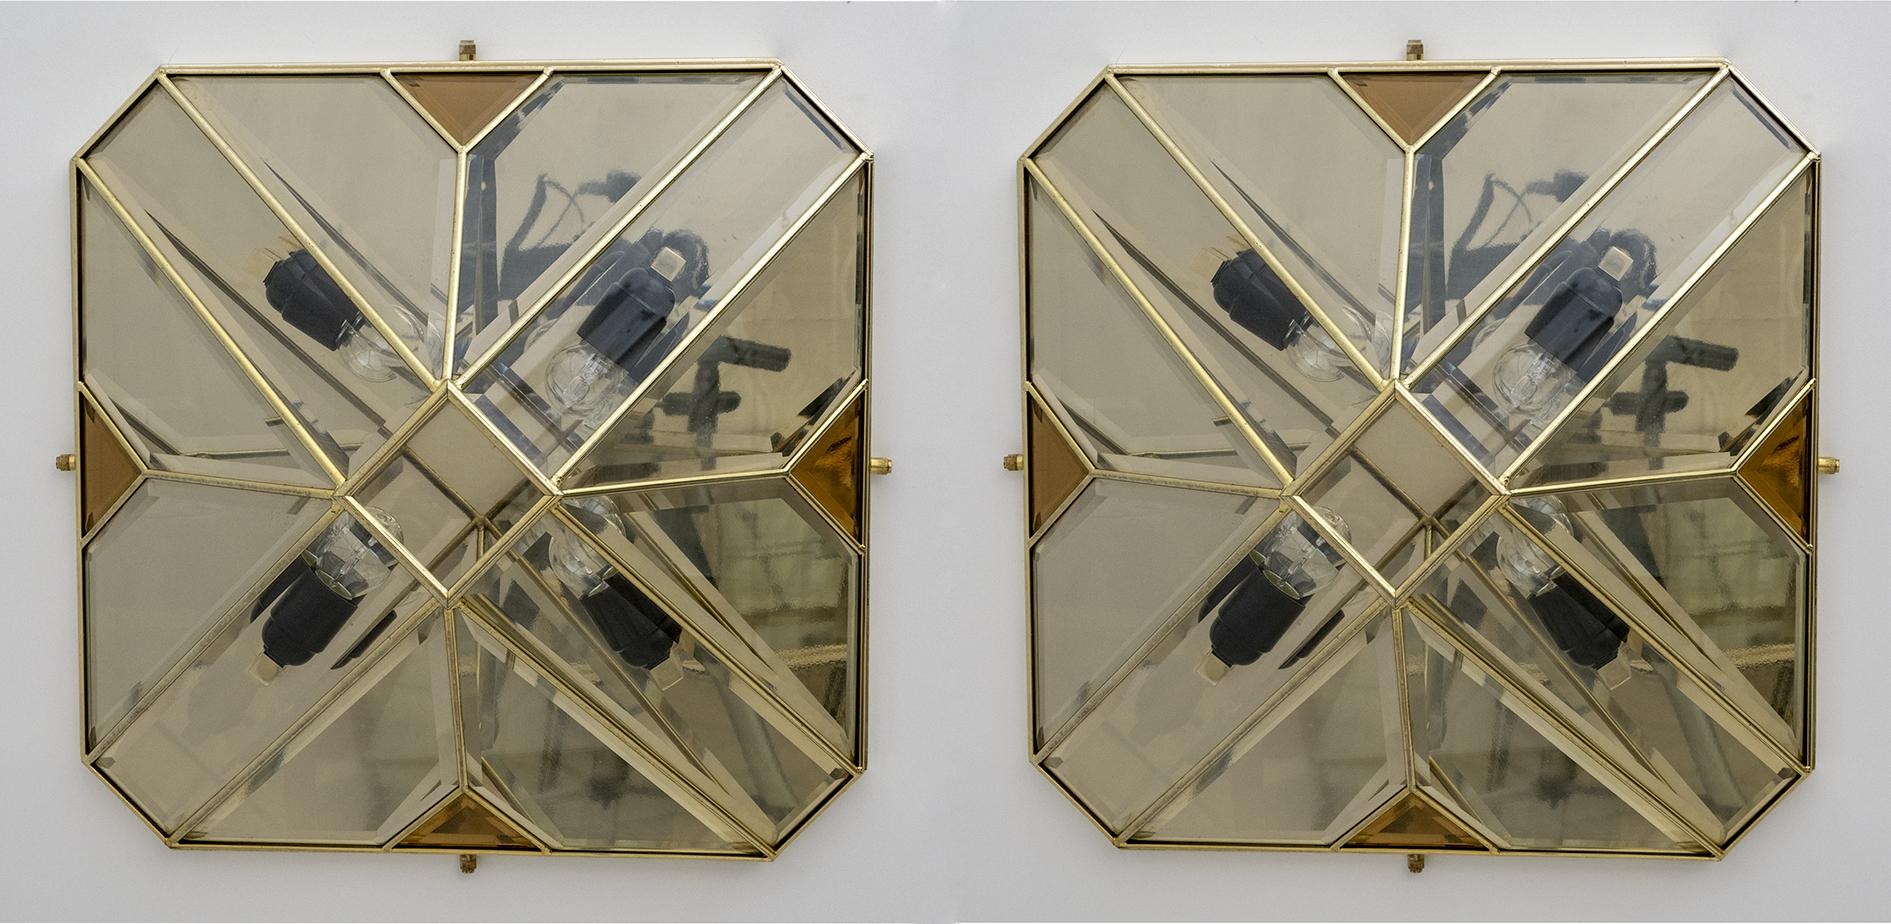 These wall lamps were produced in the 70s in Italy, have a square base and the shape of a parallelepiped, the structure is in brass and the glasses are beveled, this process makes them unique and illuminated have a very particular effect.
They are